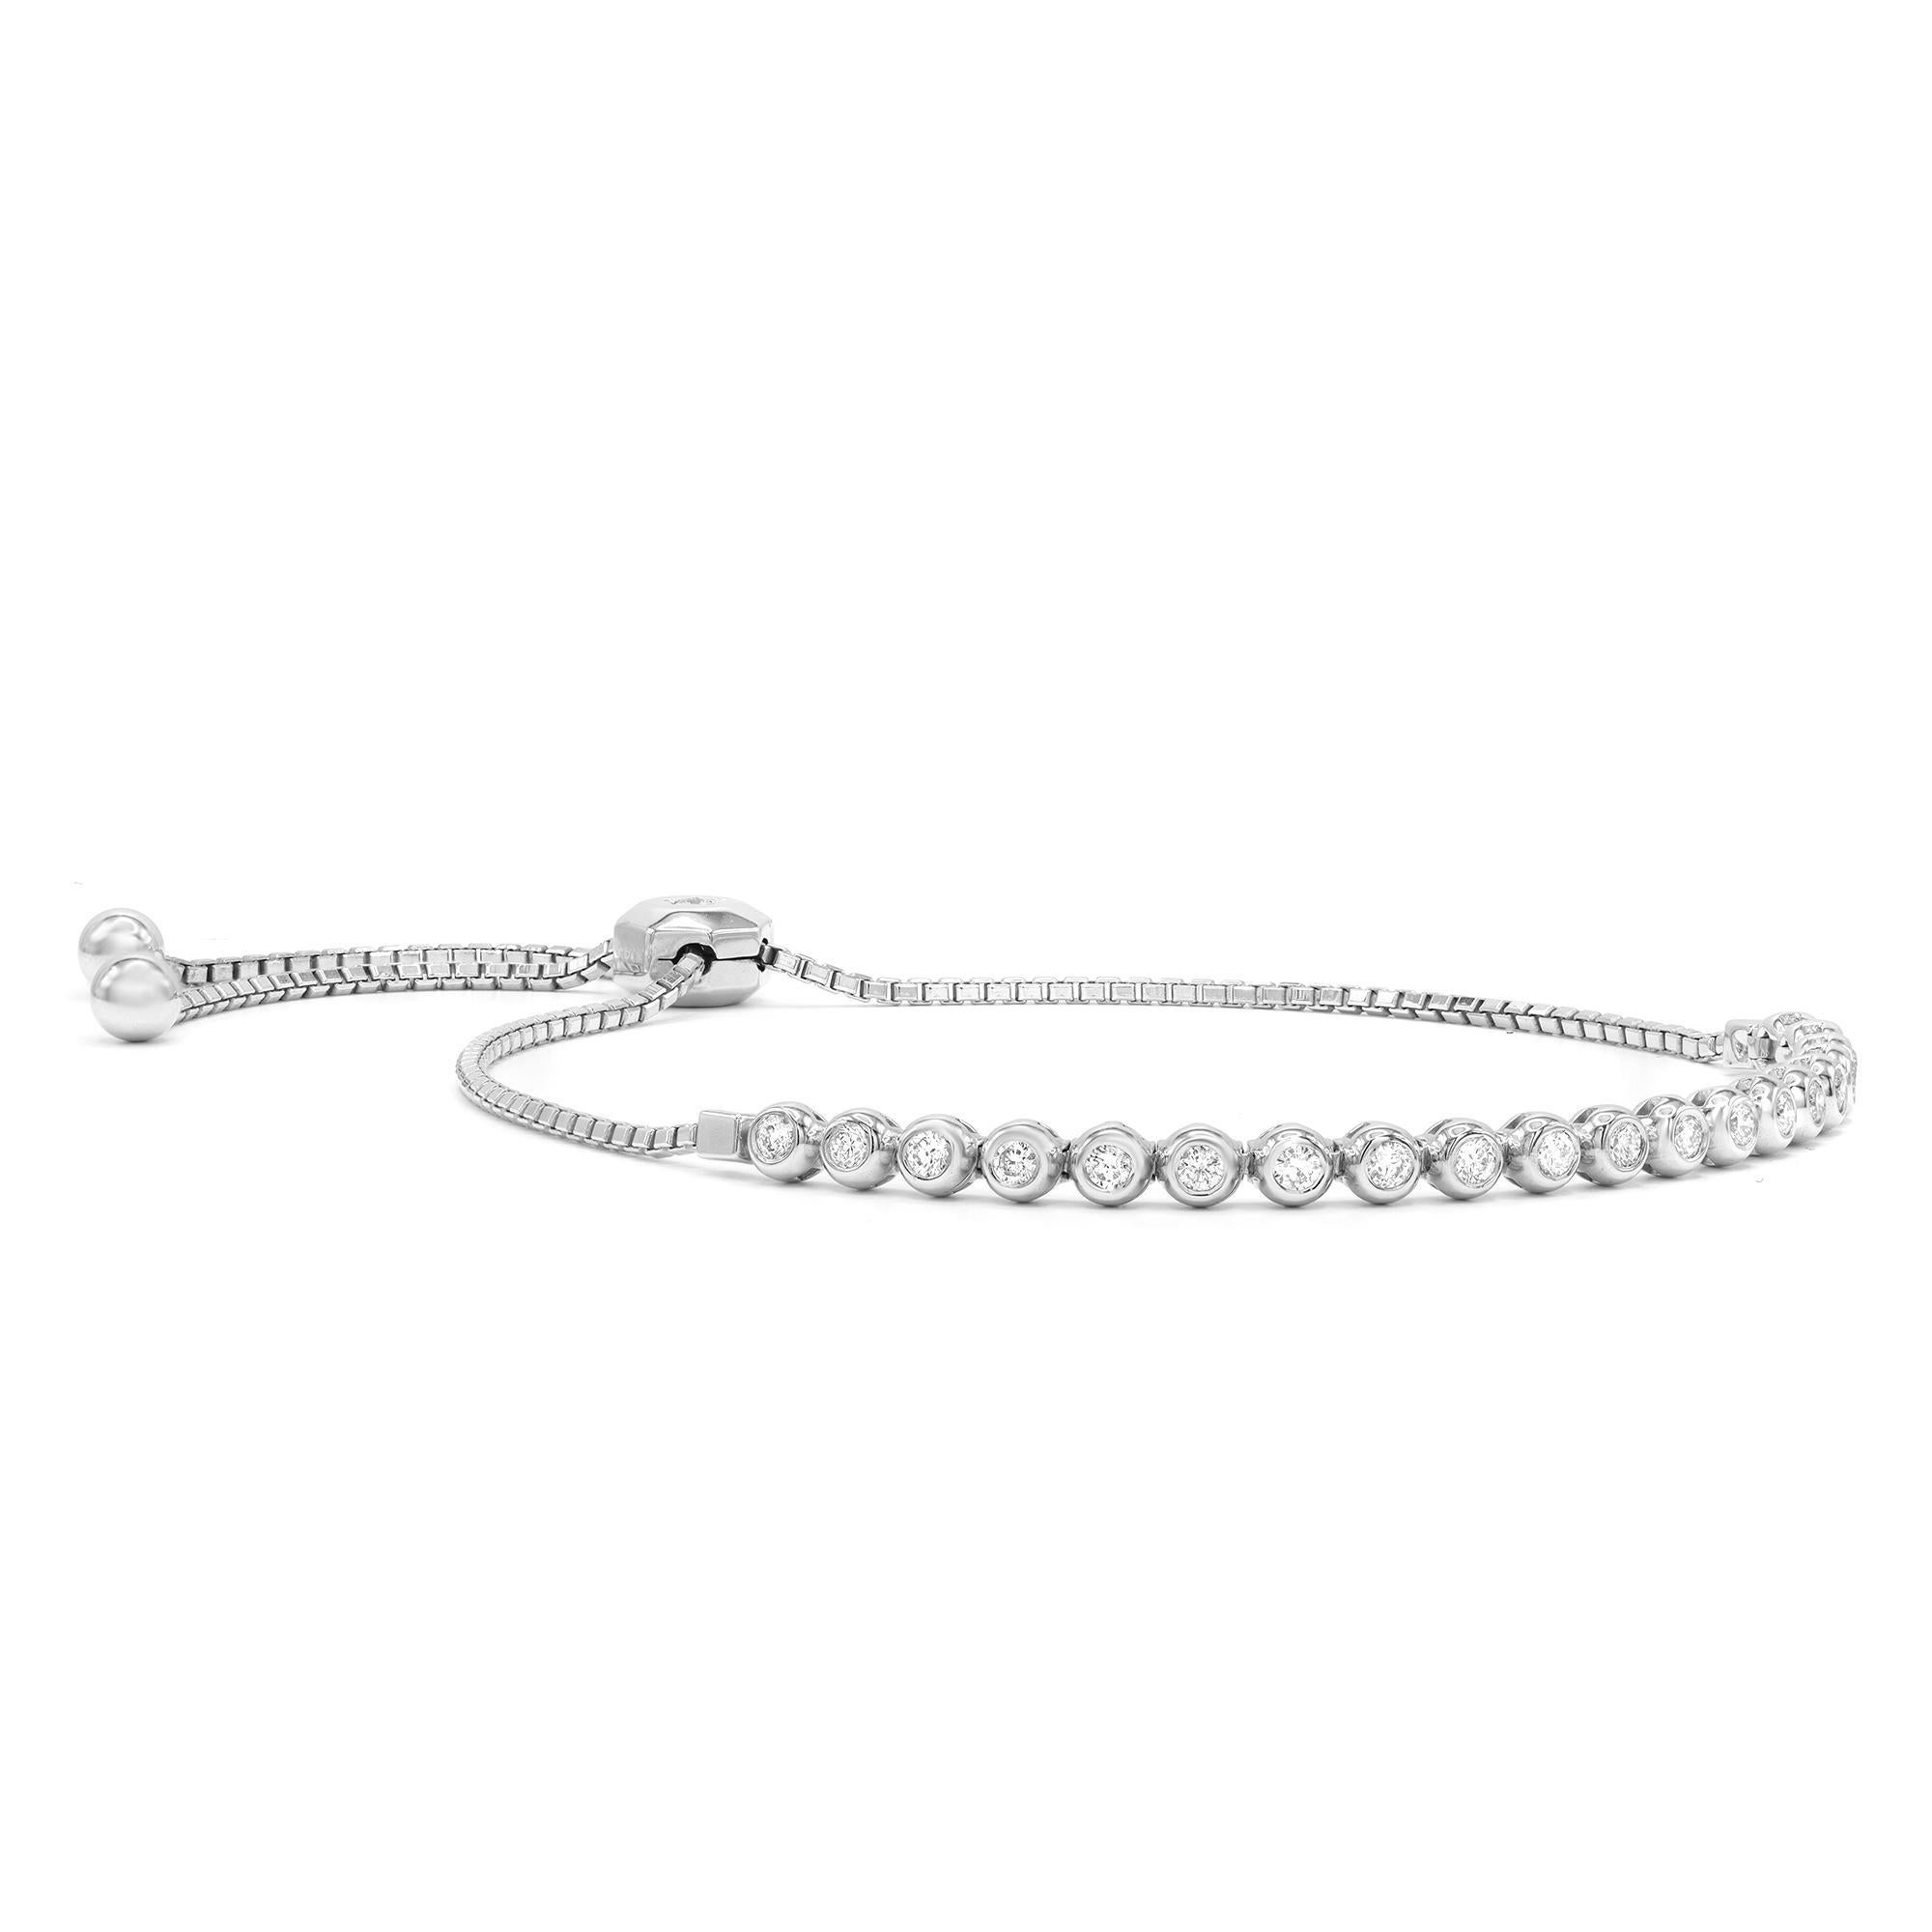 Trendy tennis bracelet with a sliding lariat closure on a delicate box chain. Super comfortable, so easy to wear! The design is shimmered with 22 bezel set round brilliant cut diamonds totaling 0.68 carats crafted in fine 14K White Gold. Good